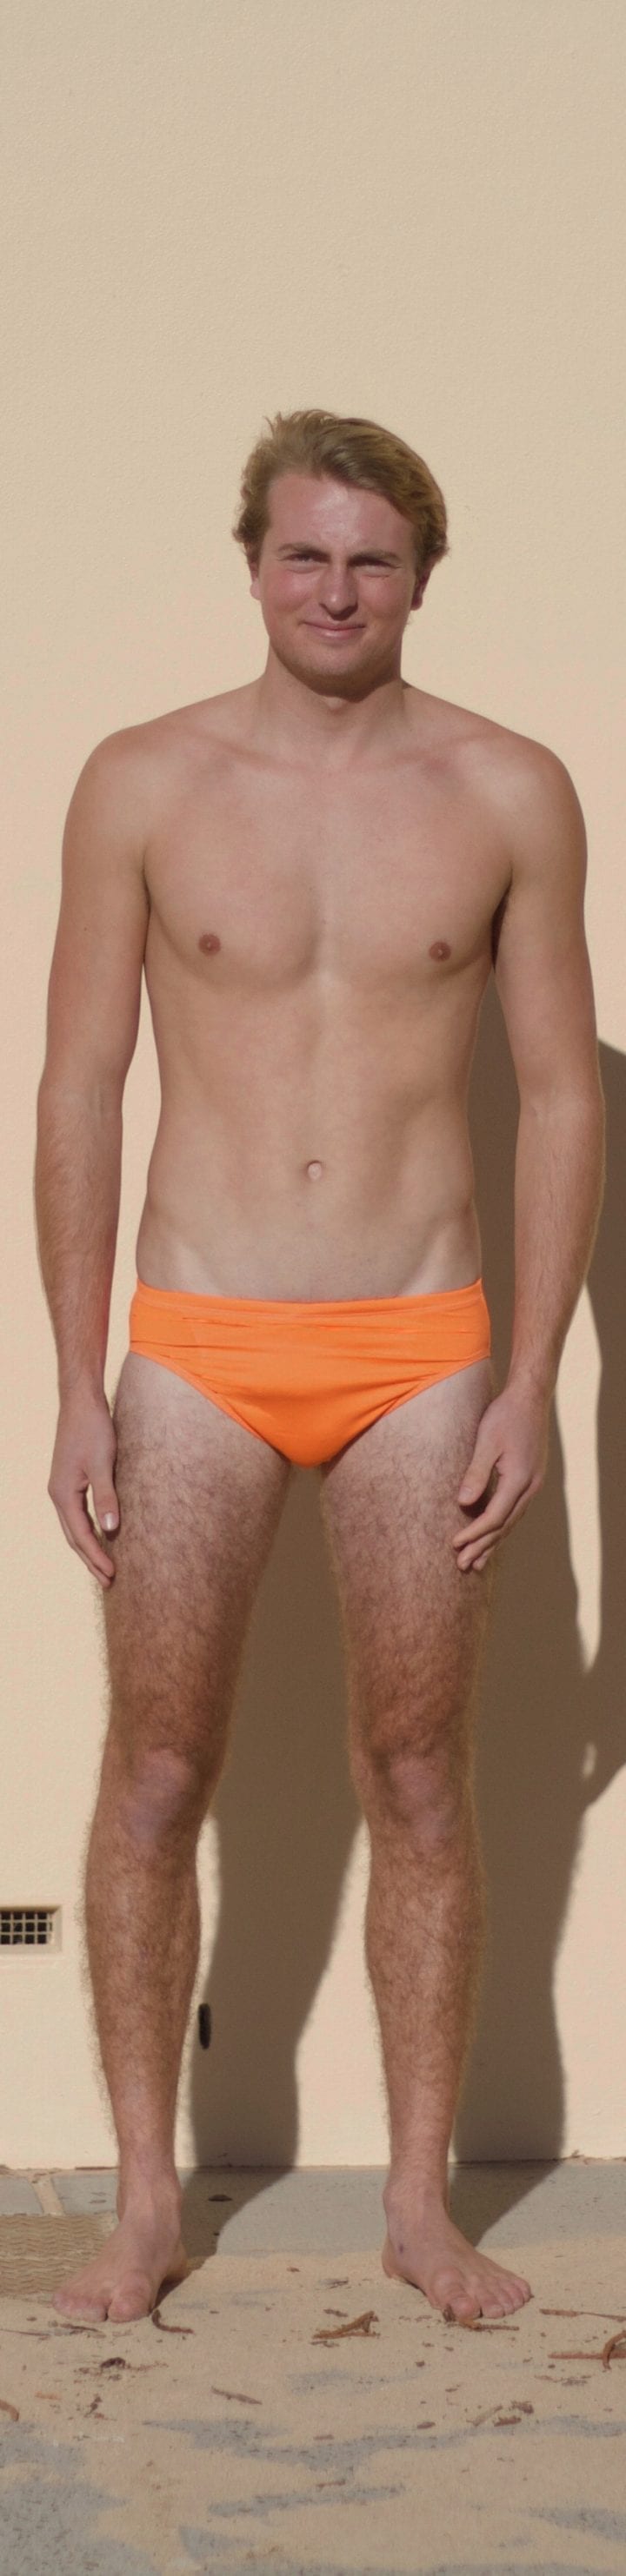 orange mens swimmmers front scaled